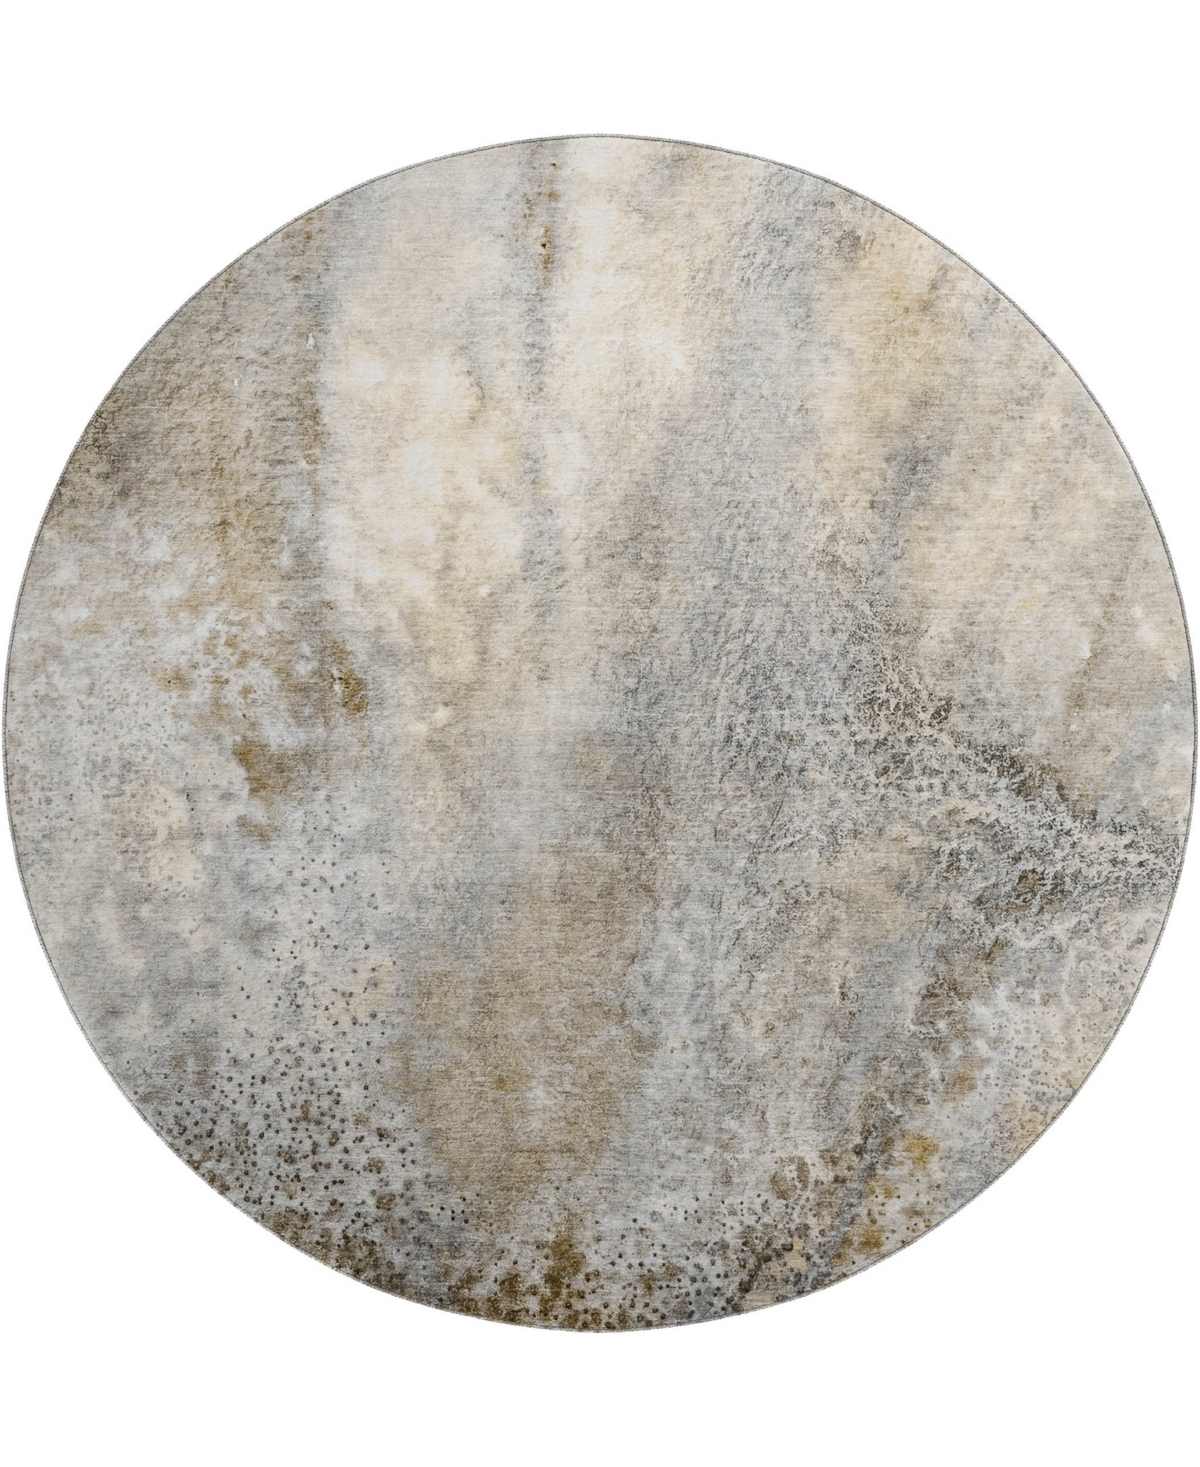 Shop Dalyn Odyssey Oy5 8' X 8' Round Area Rug In Taupe